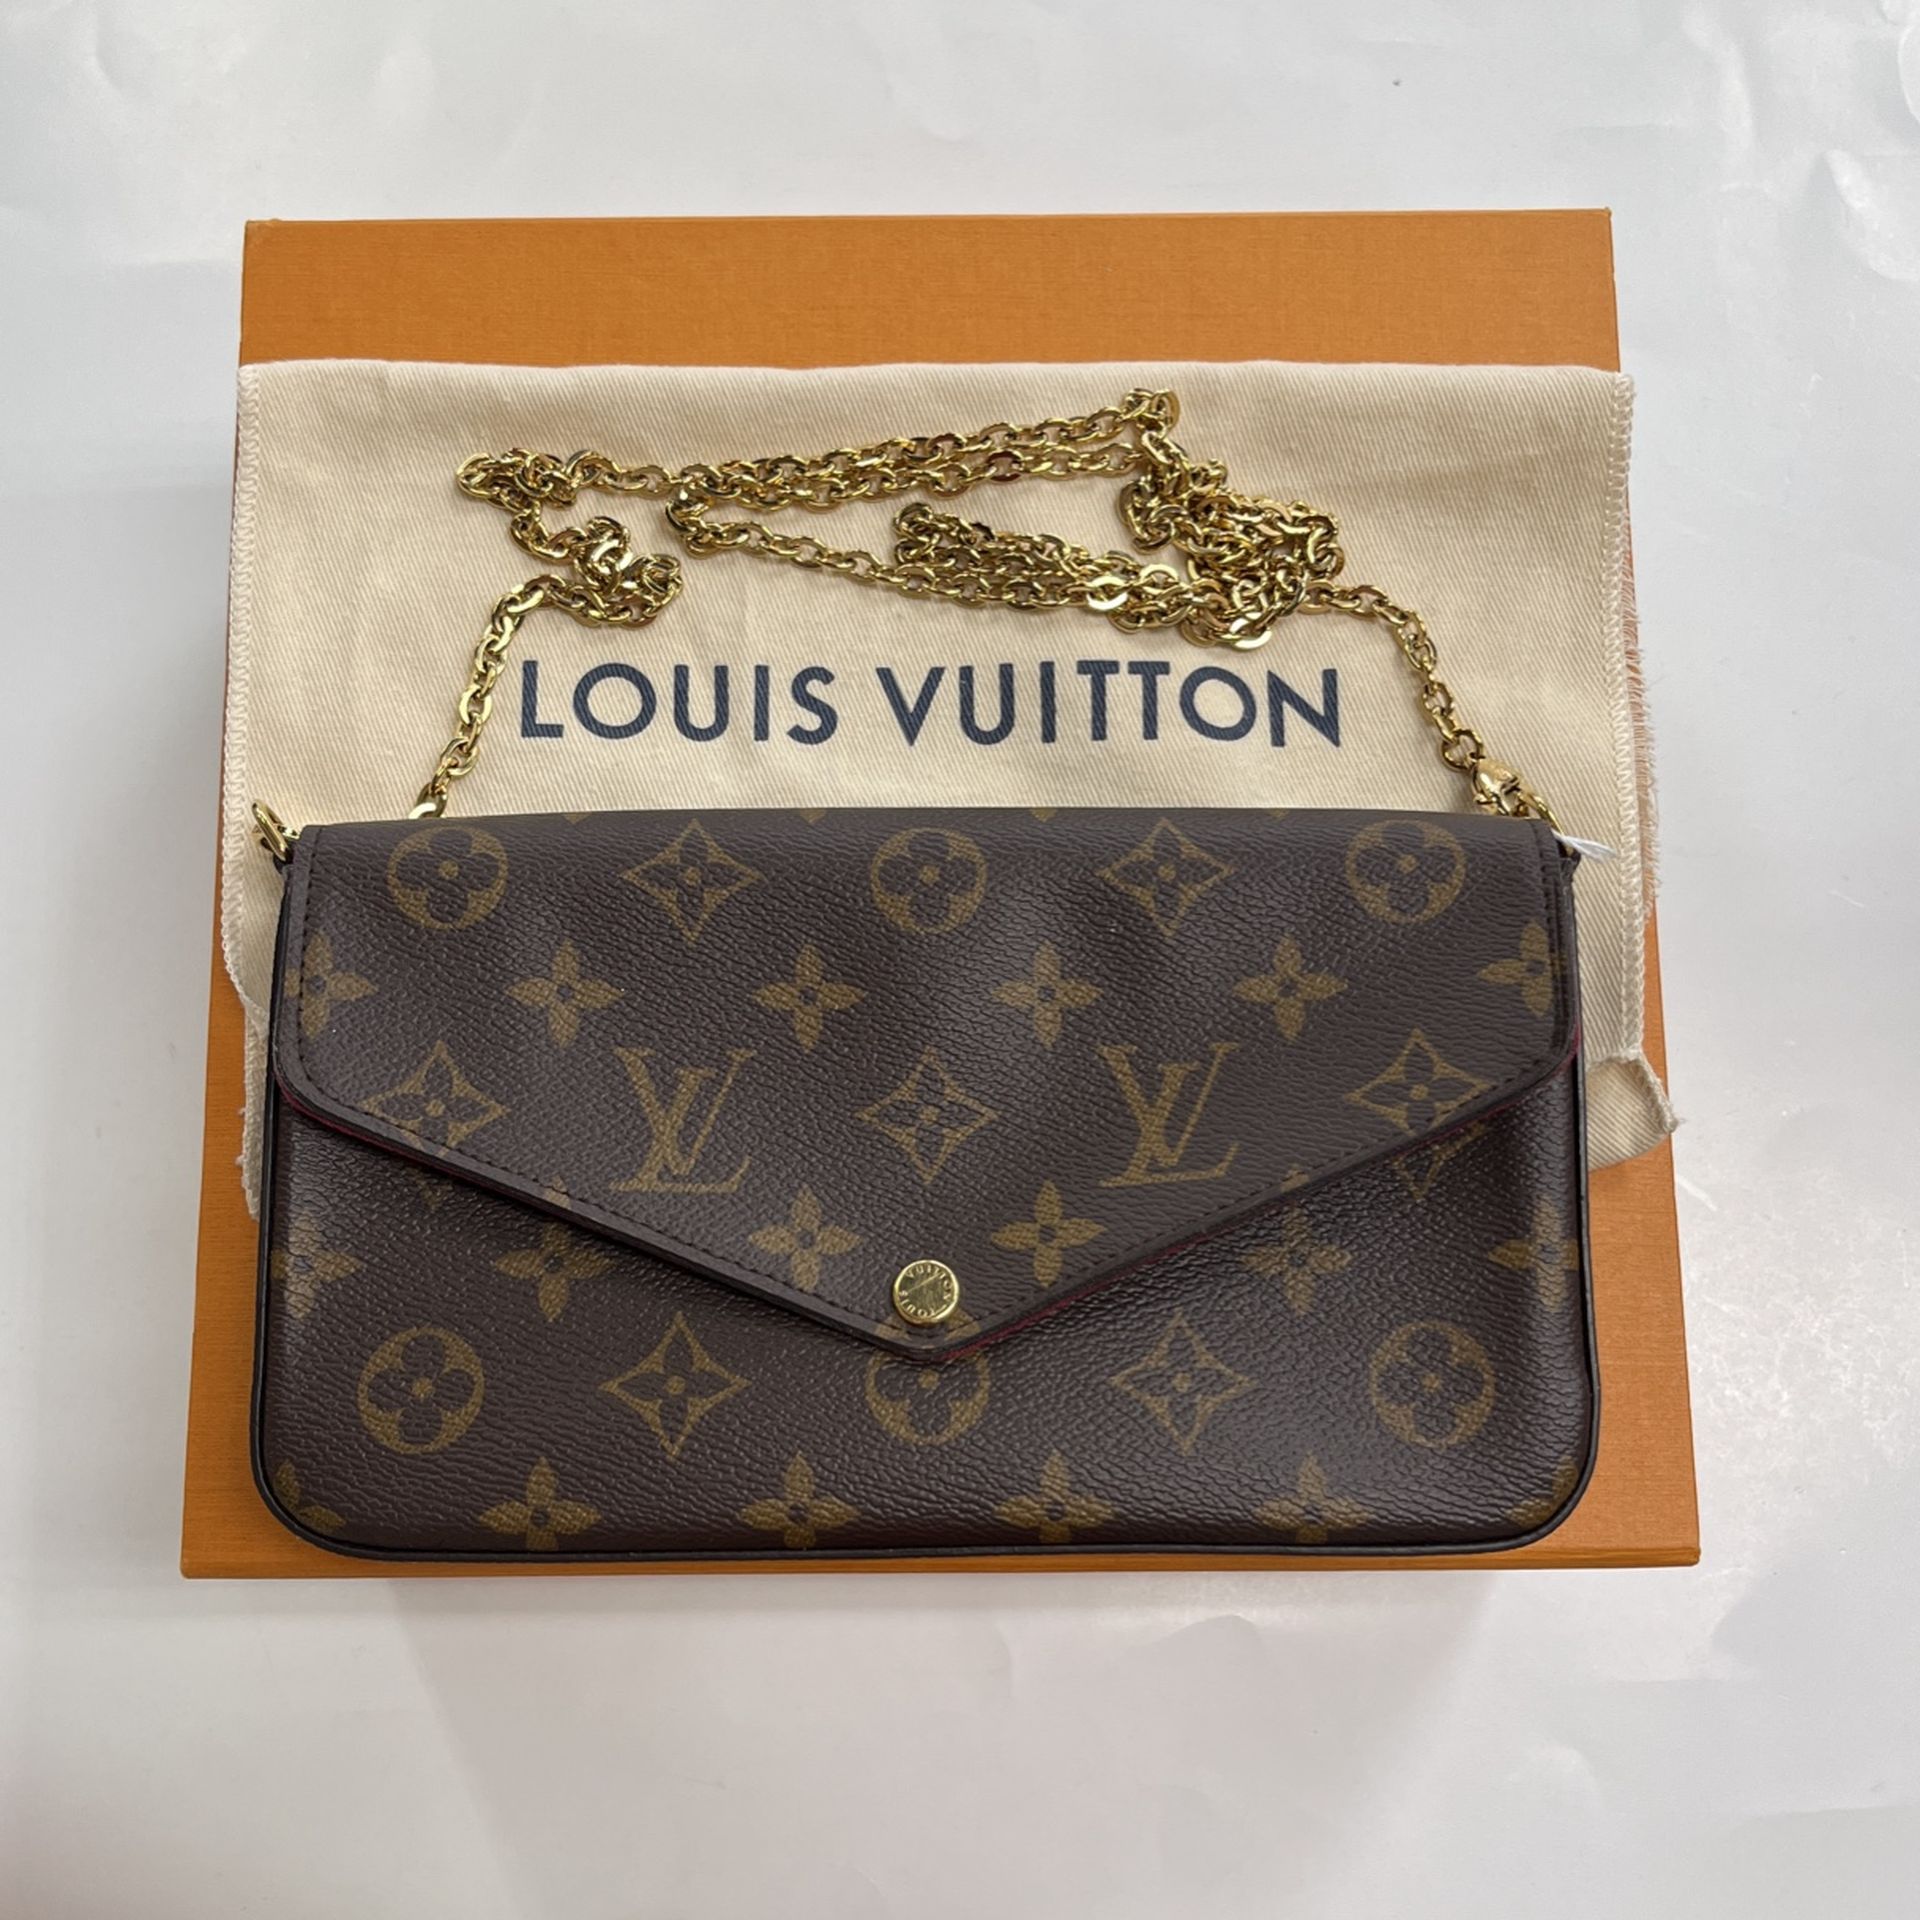 Louis Vuitton Pochette Felicie, With Dust Bag And Box, Verified With Entrupy